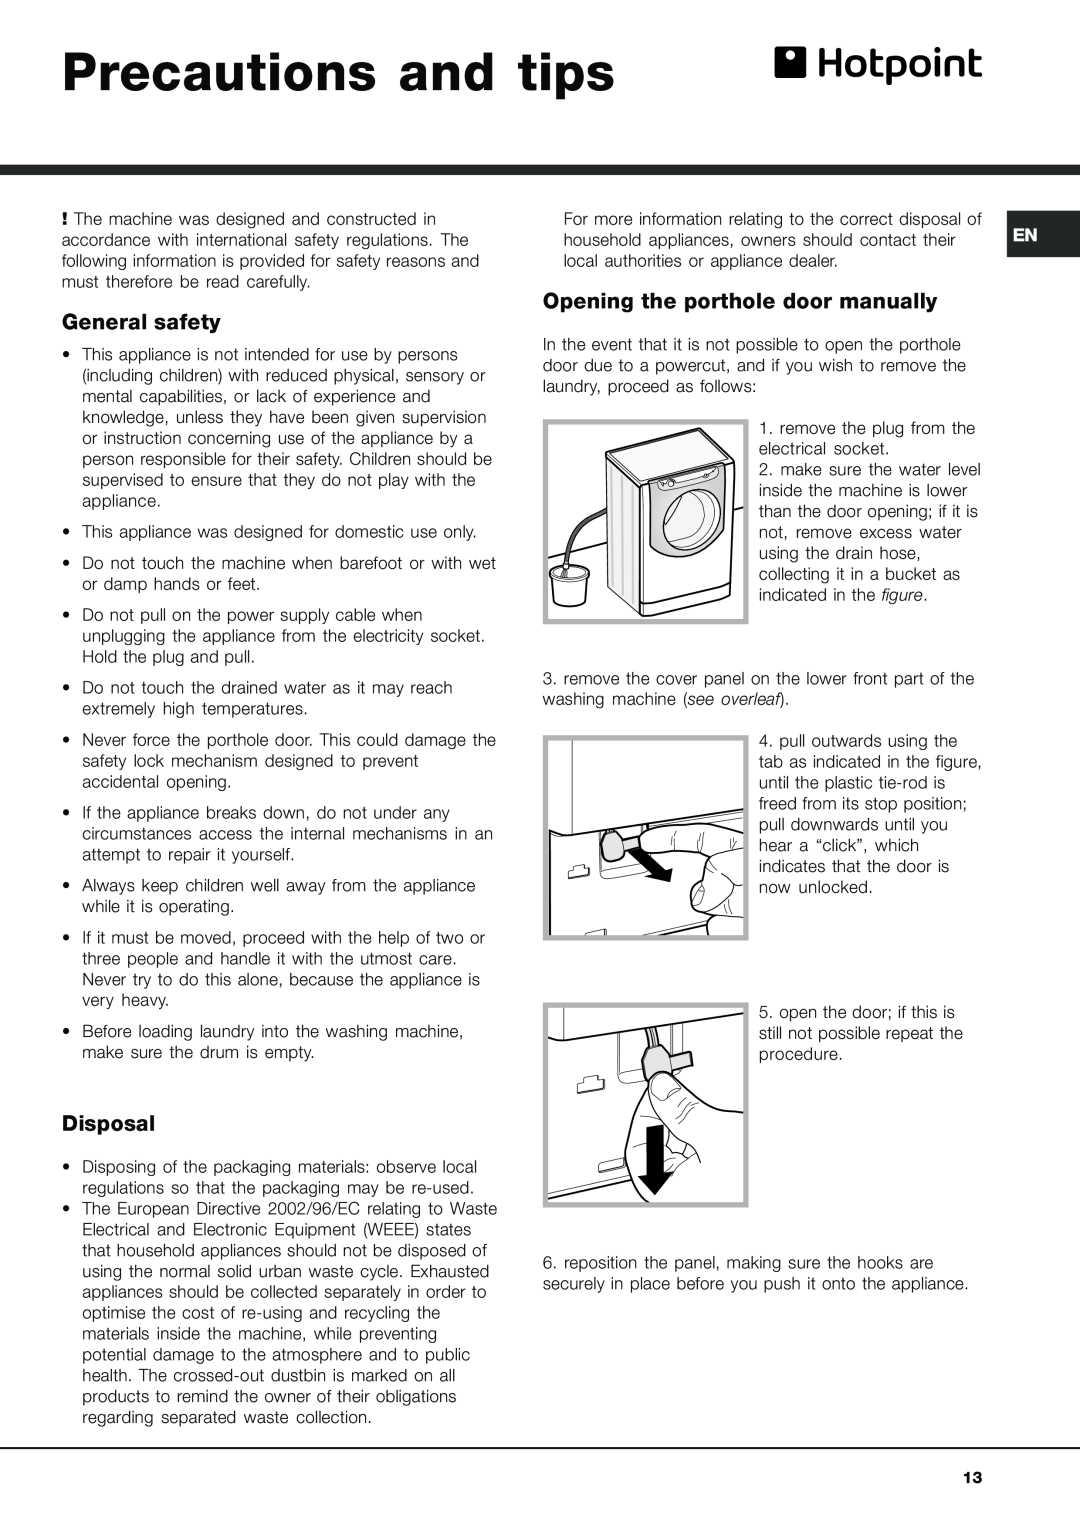 Xerox AQLF9D 69 U Precautions and tips, General safety, Disposal, Opening the porthole door manually 